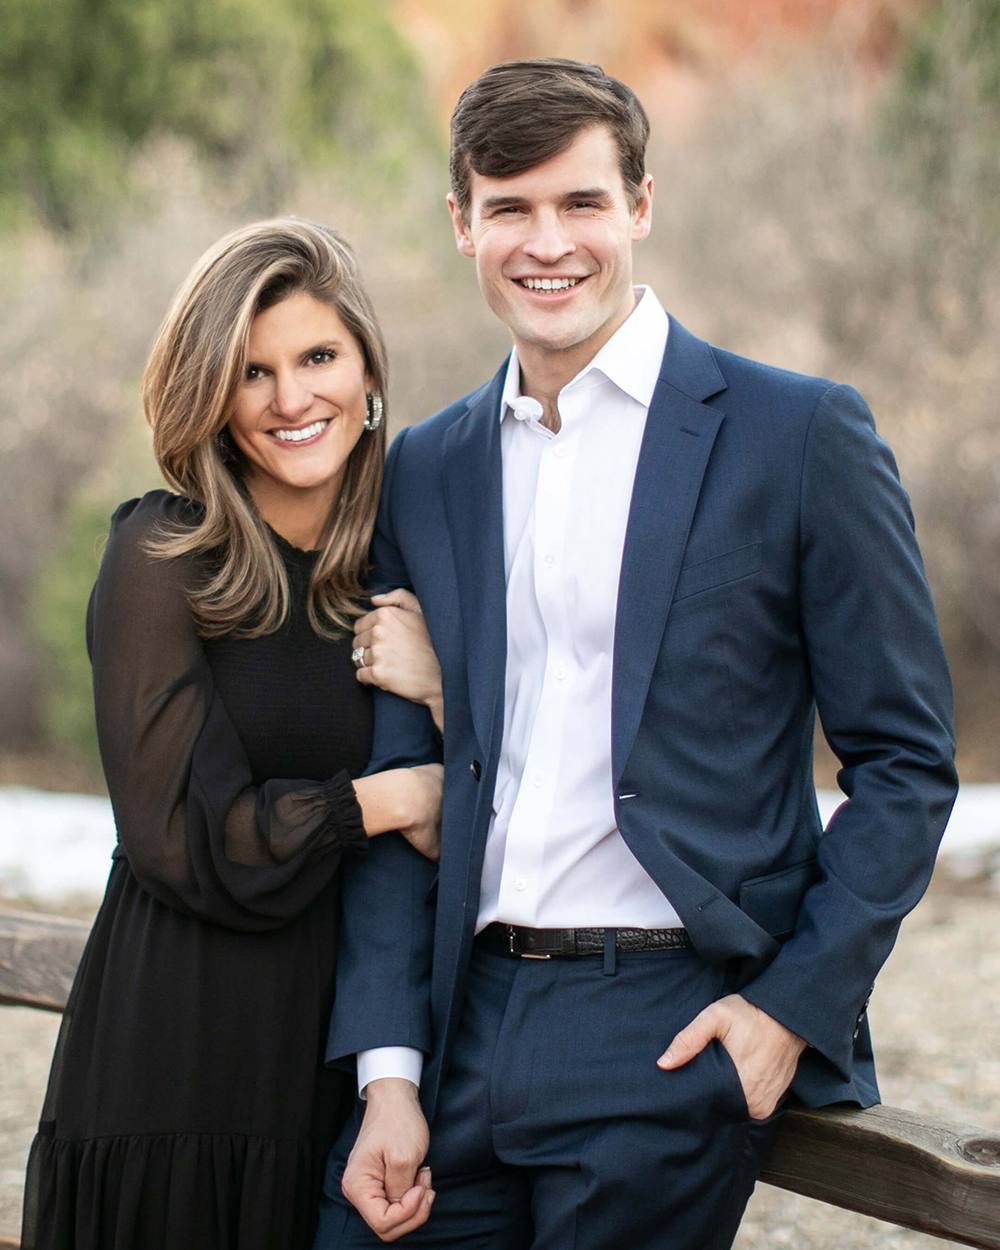 Colorado Engagement Portraits to ‘Brighton’ Your Day